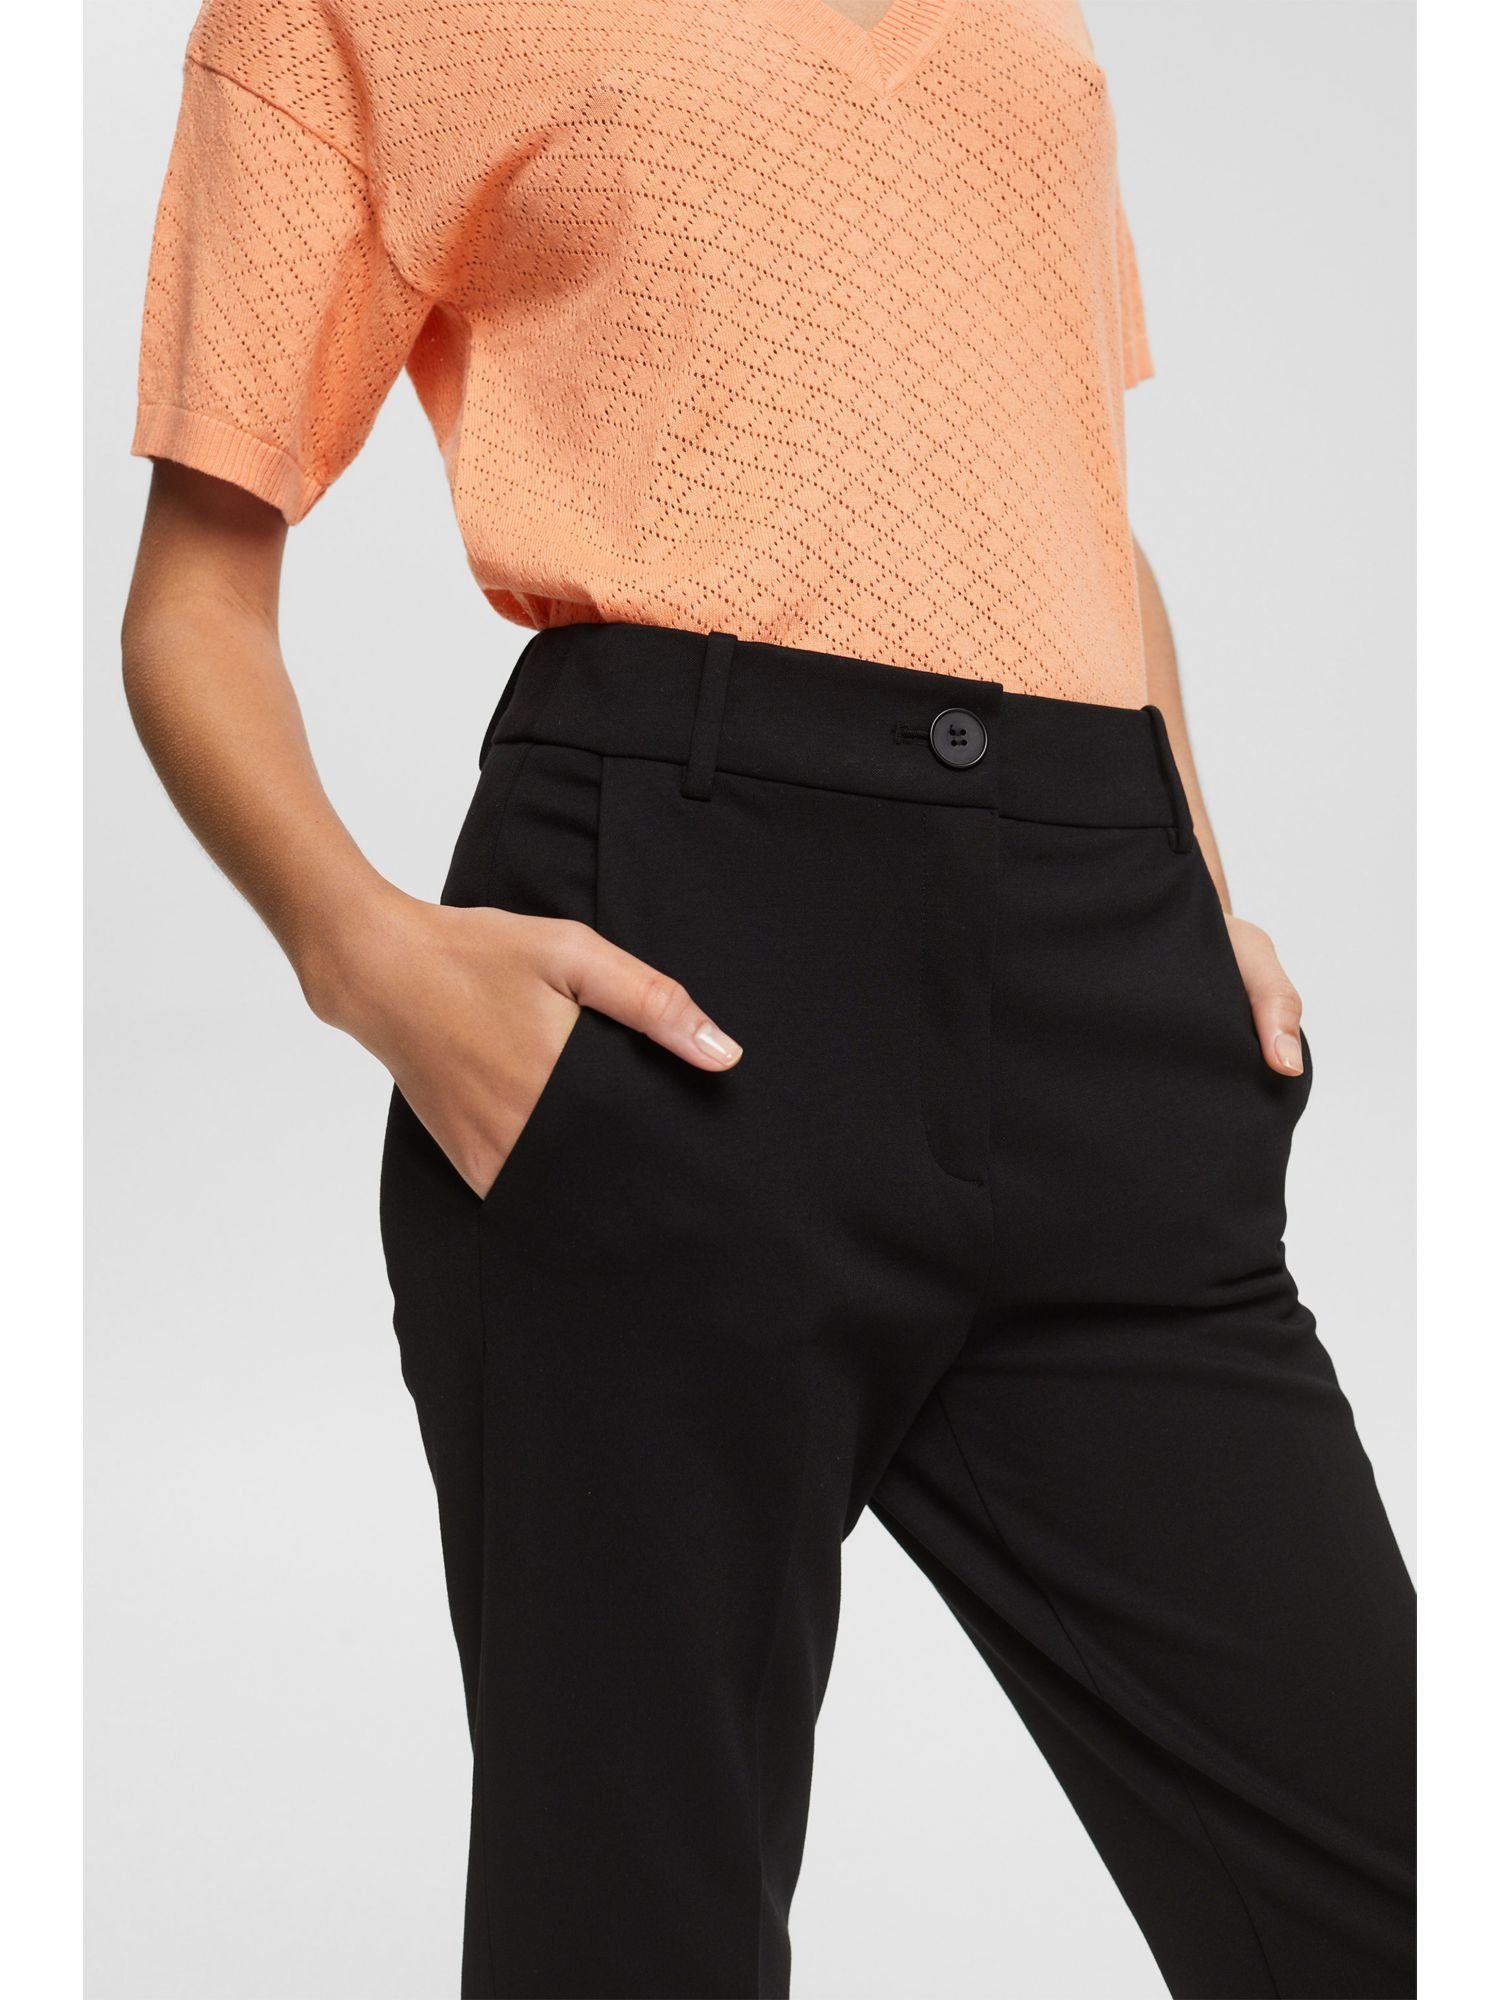 Pants BLACK Tapered SPORTY Mix PUNTO Collection Match & Esprit Stretch-Hose